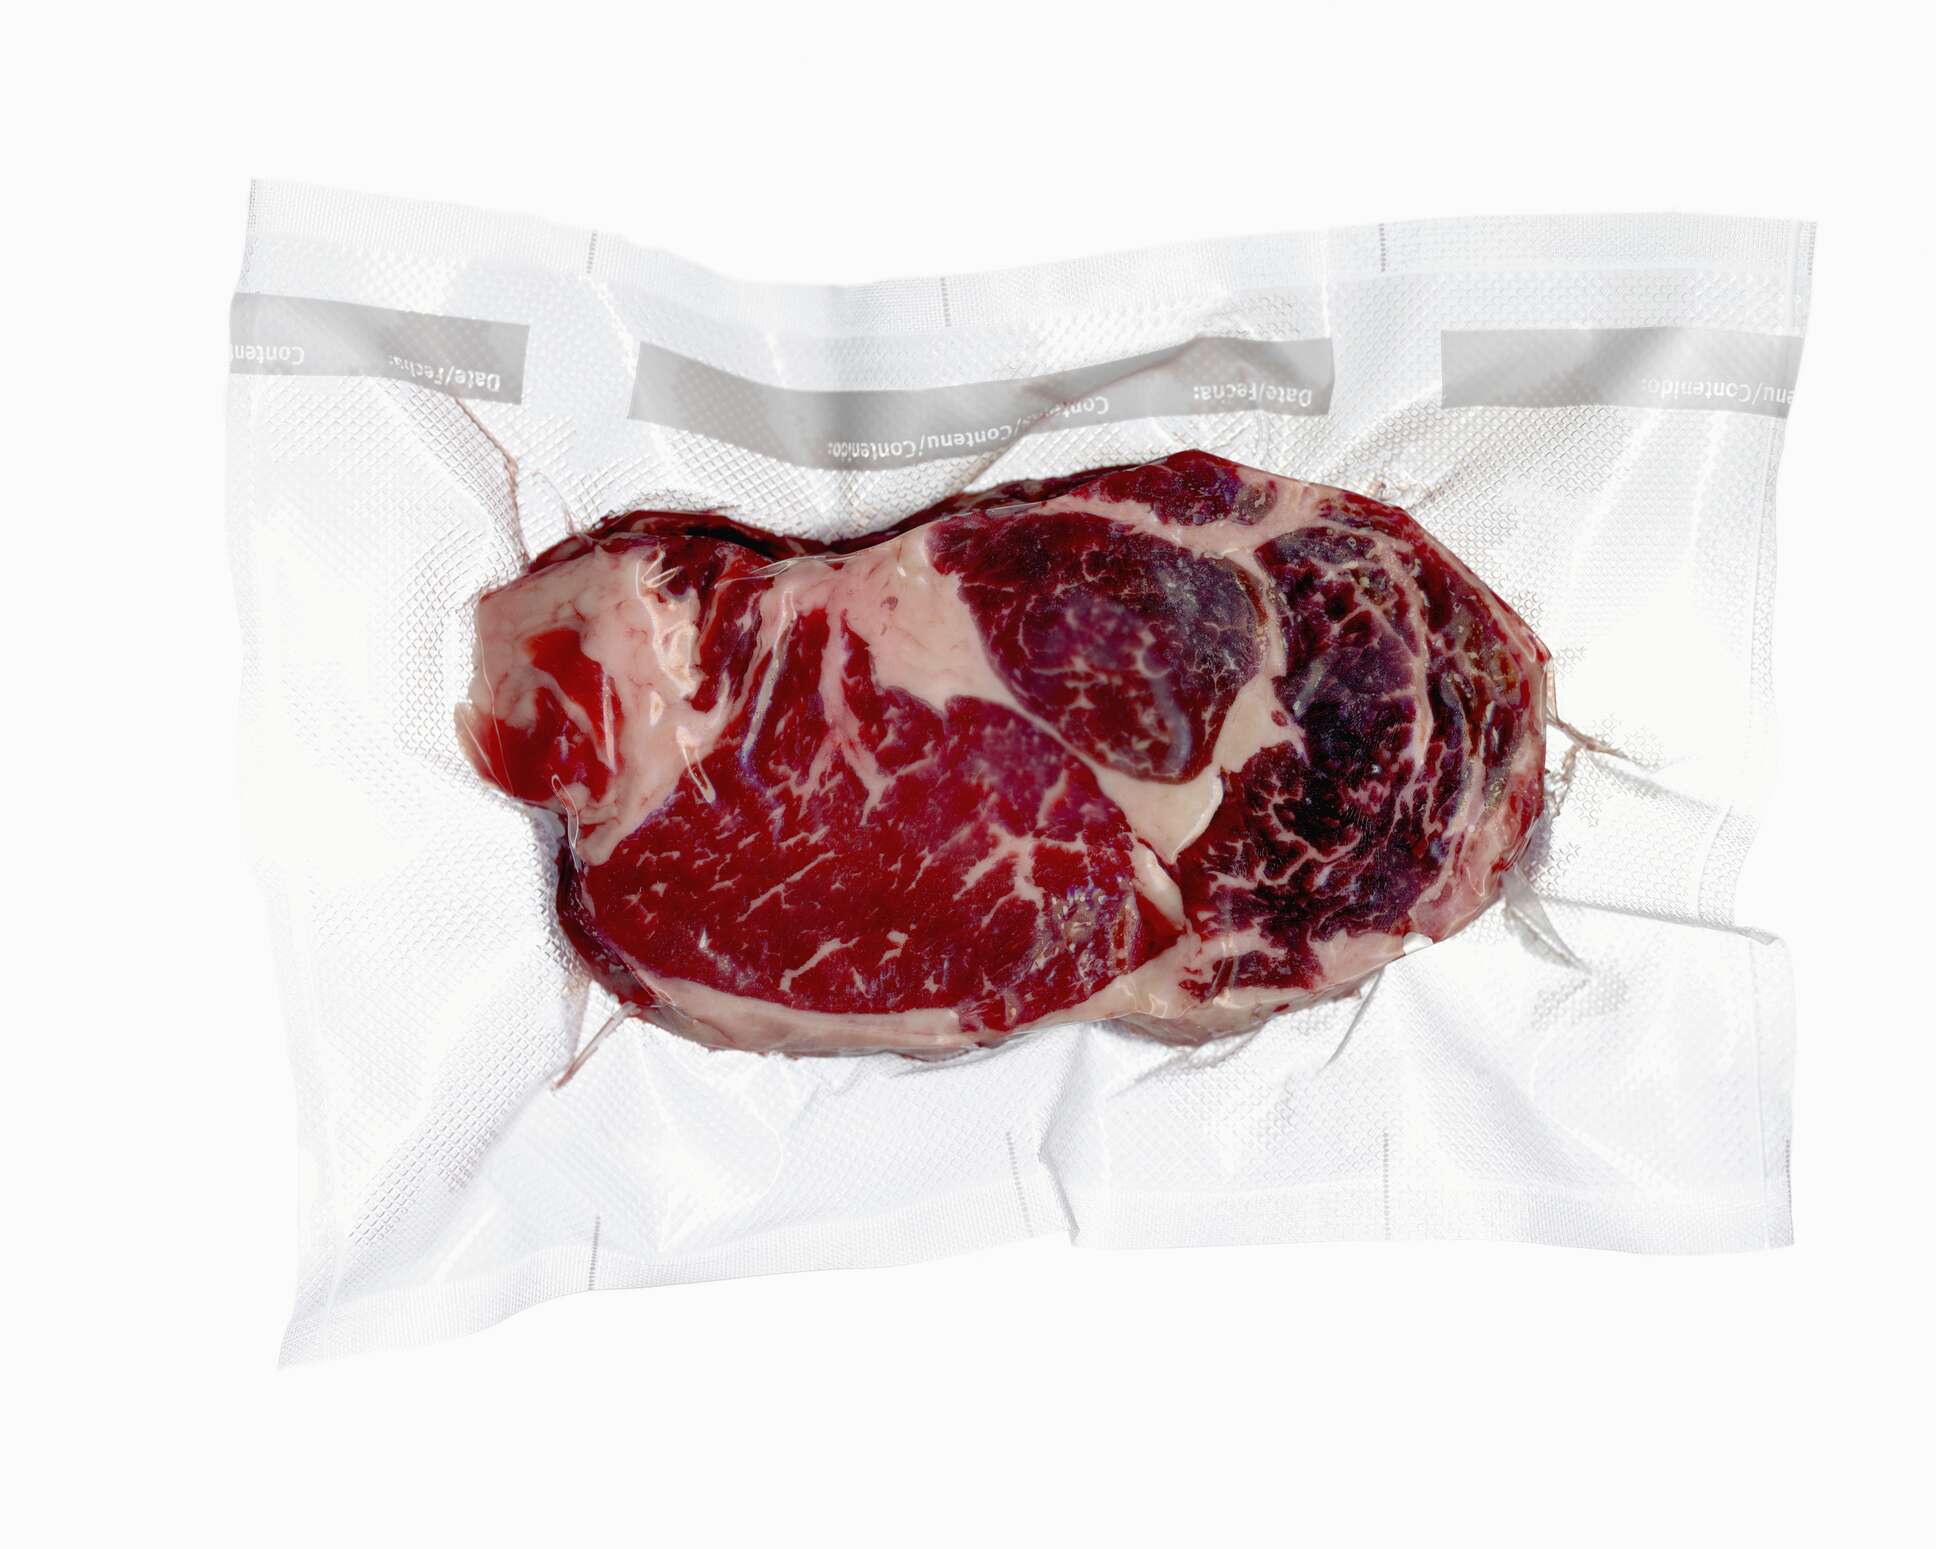 Ask the experts: Plastic wrap and food safety - Healthy Food Guide